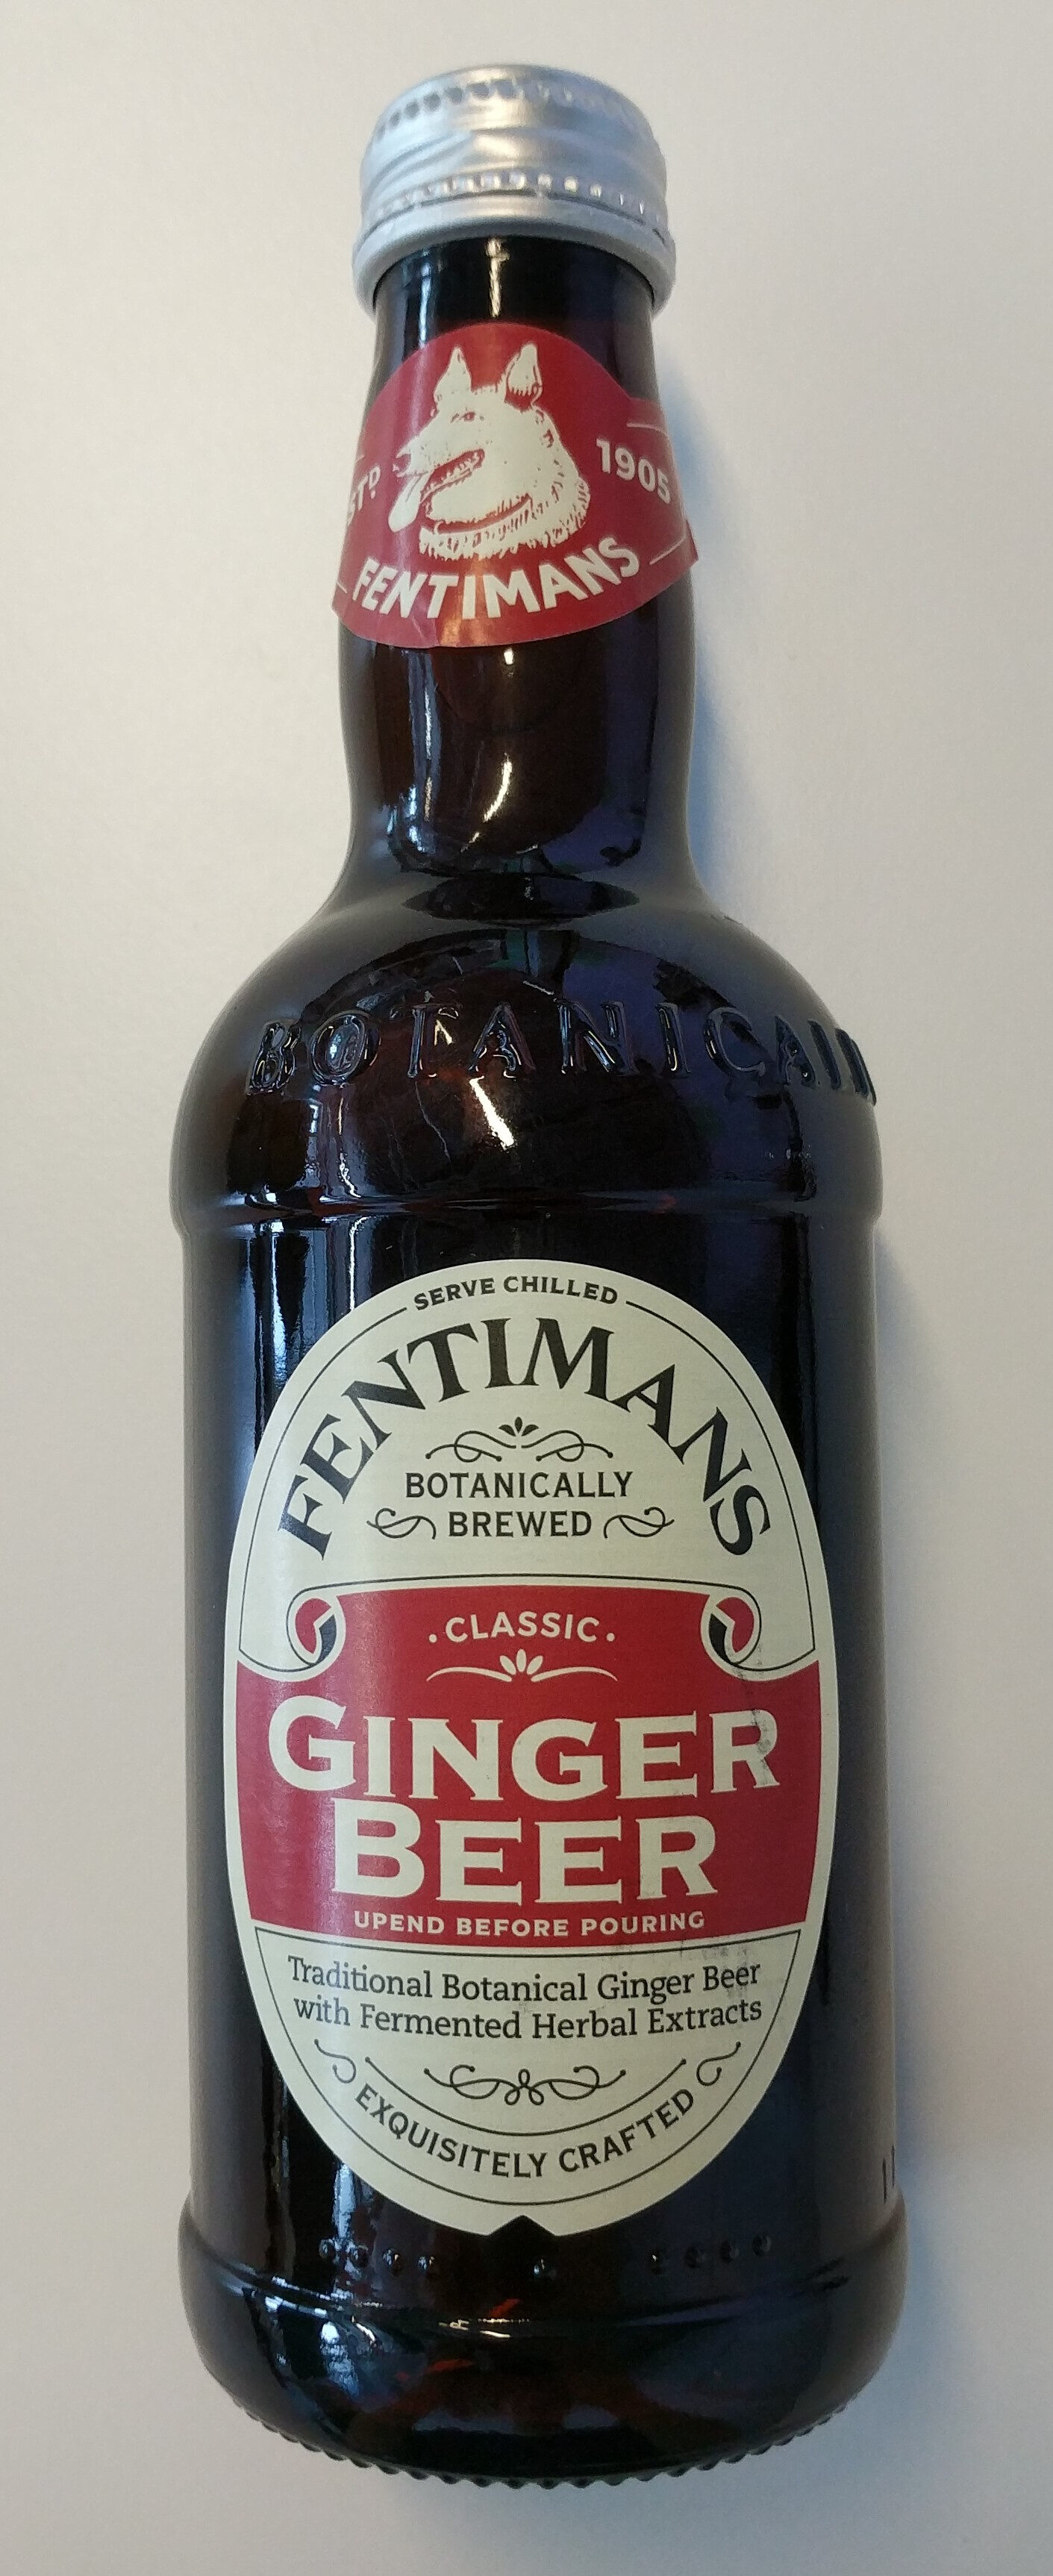 Ginger beer - Tuote - fi